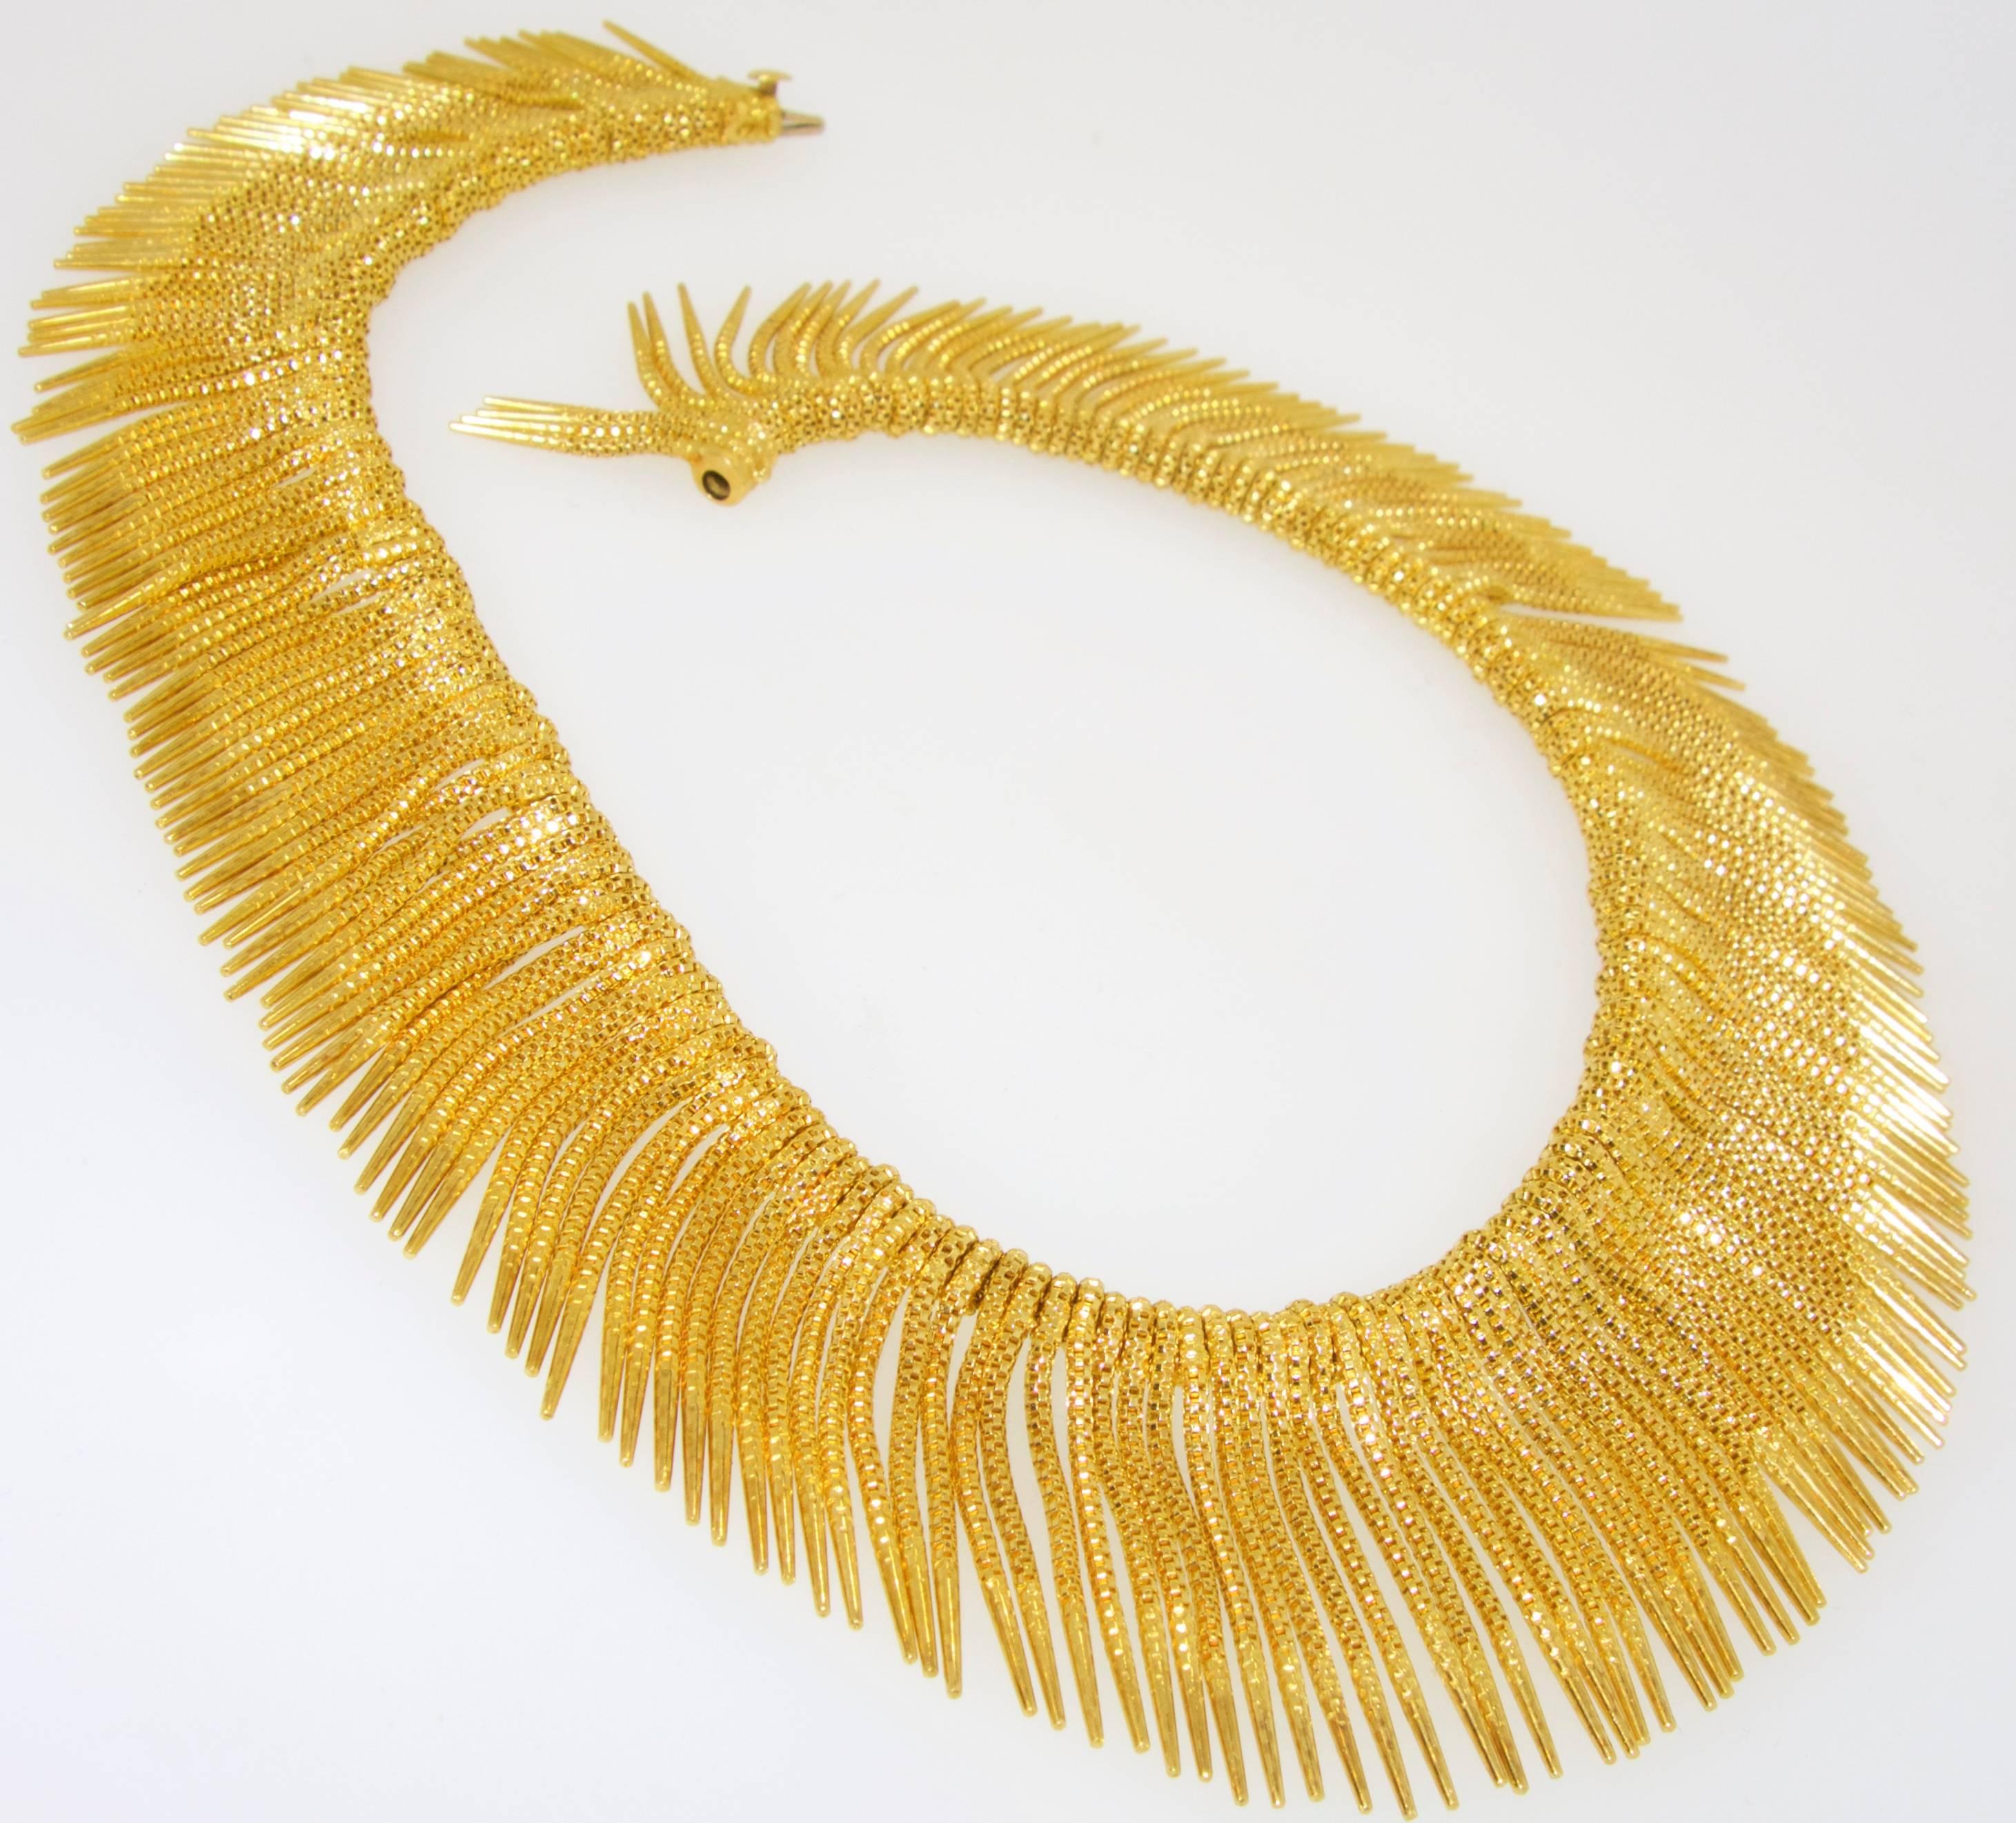 18K yellow gold weighing 93.5 dwts, 145.41 grams, this 15 inch necklace which is to be worn right at the neckline is quite unusual and the first time we have seen this design.  Finished with a barrel type clasp, the fringe is slightly graduated with